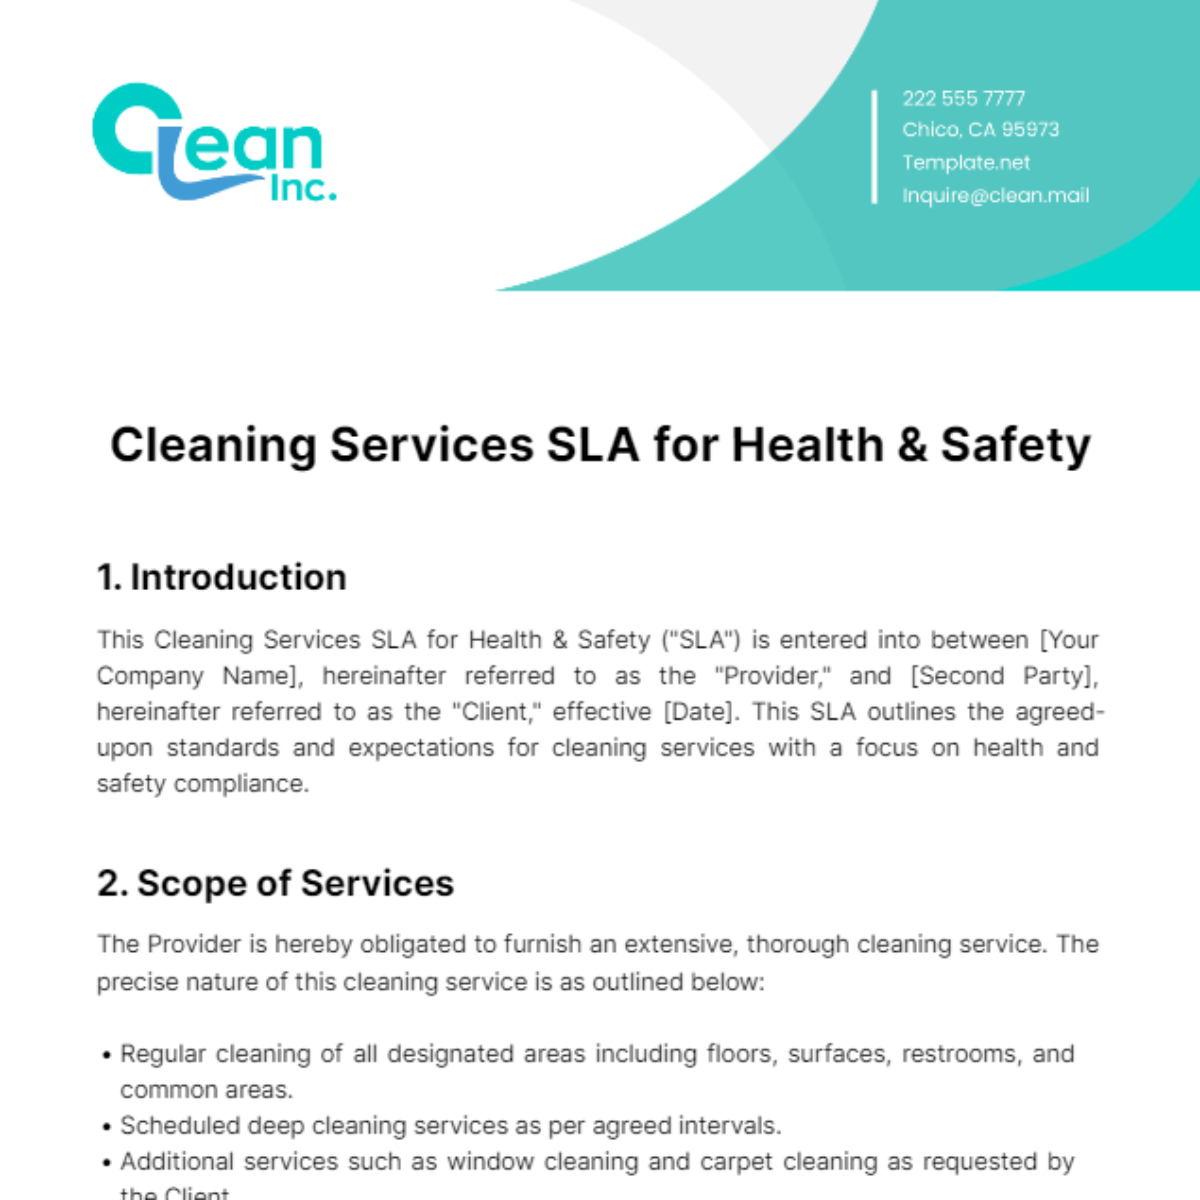 Cleaning Services SLA for Health & Safety Template